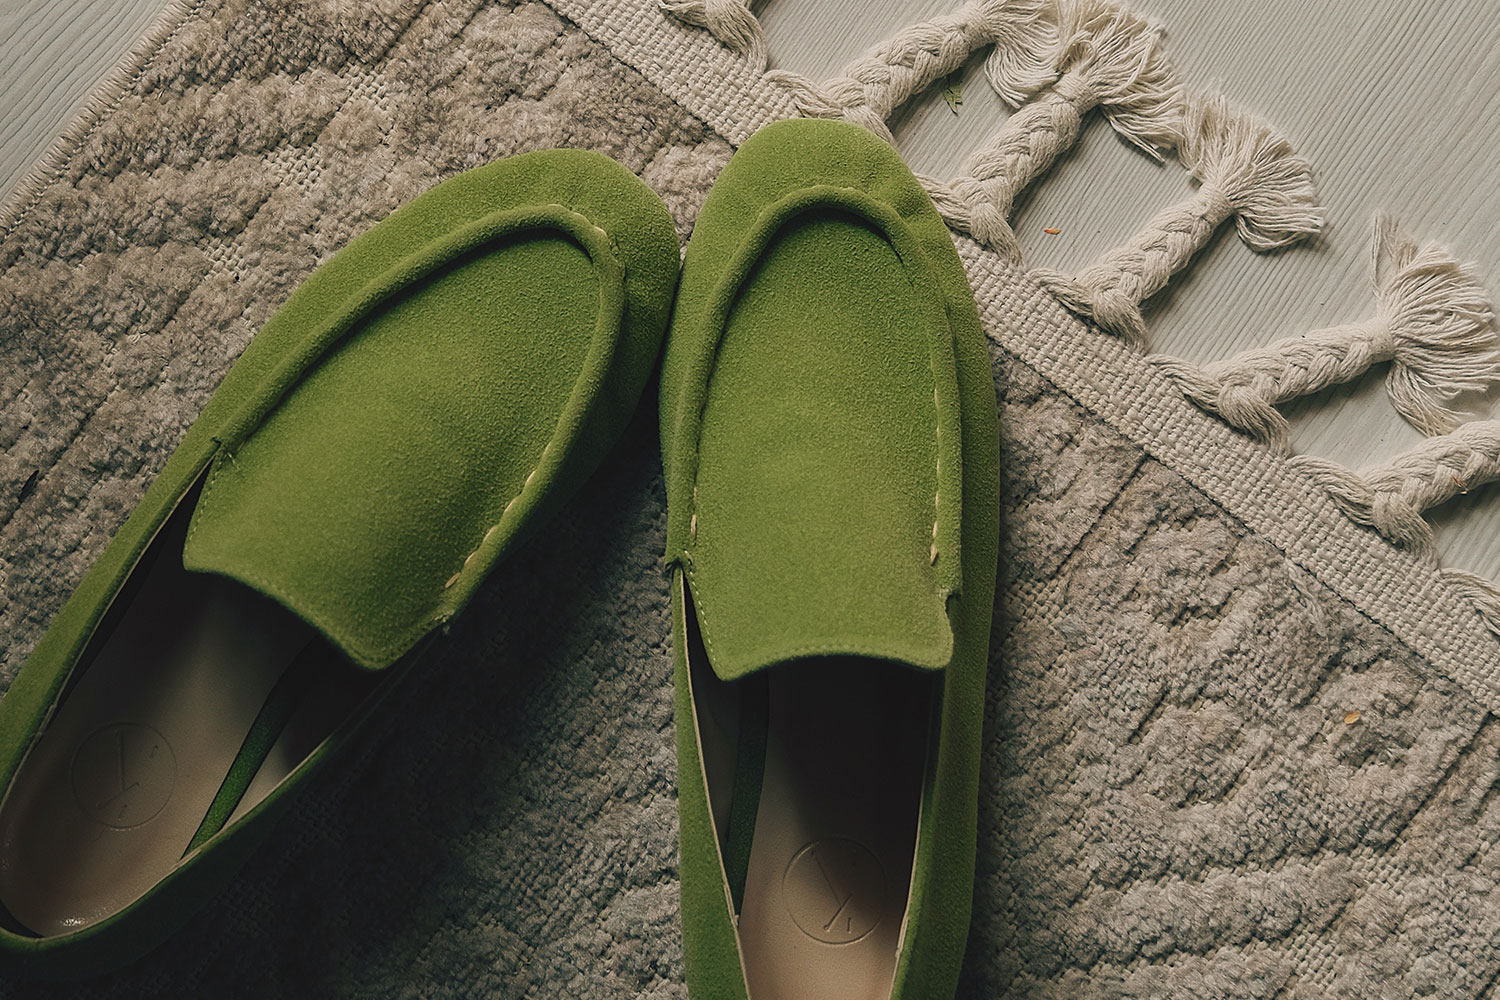 green slippers on the rug